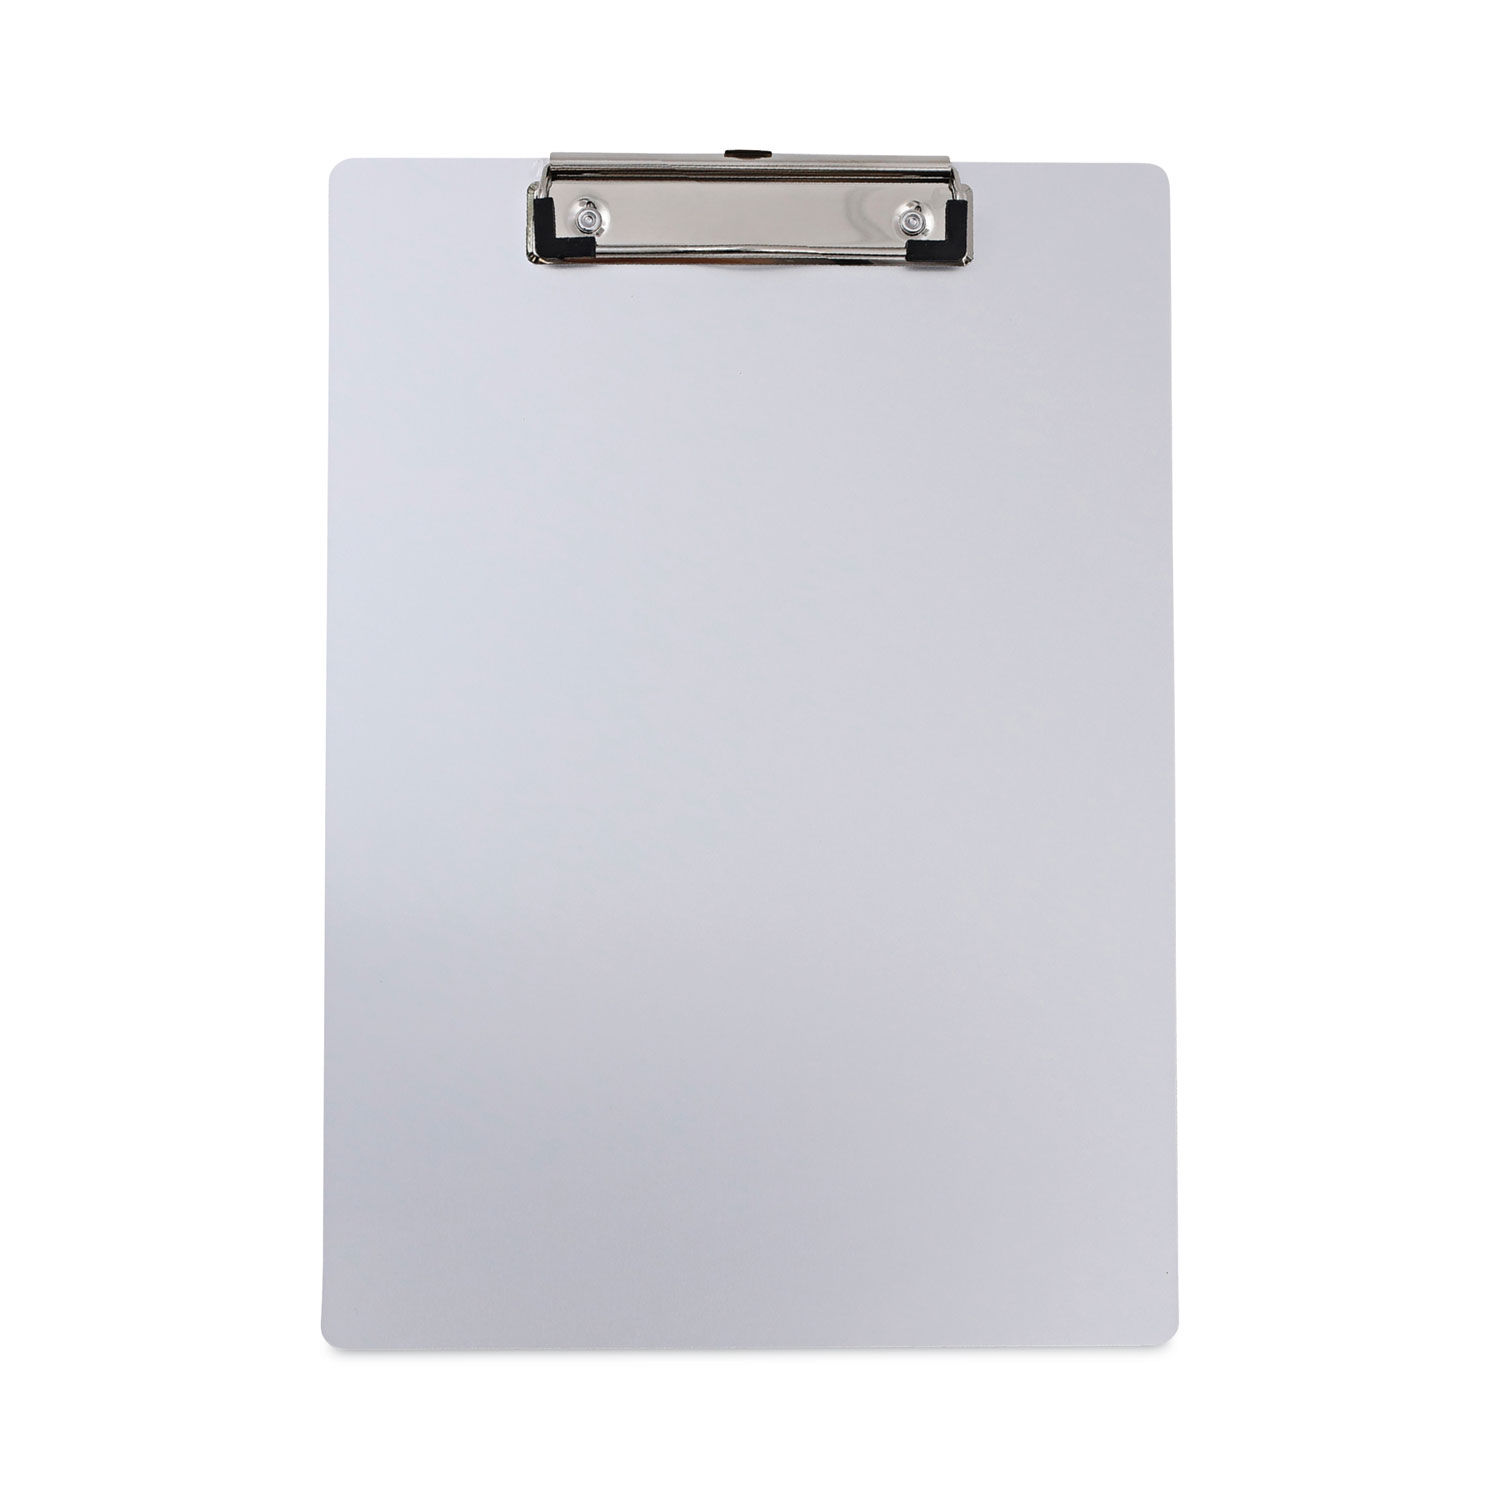 Aluminum Clipboard with Low Profile Clip 0.5" Clip Capacity, Holds 8.5 x 11 Sheets, Aluminum